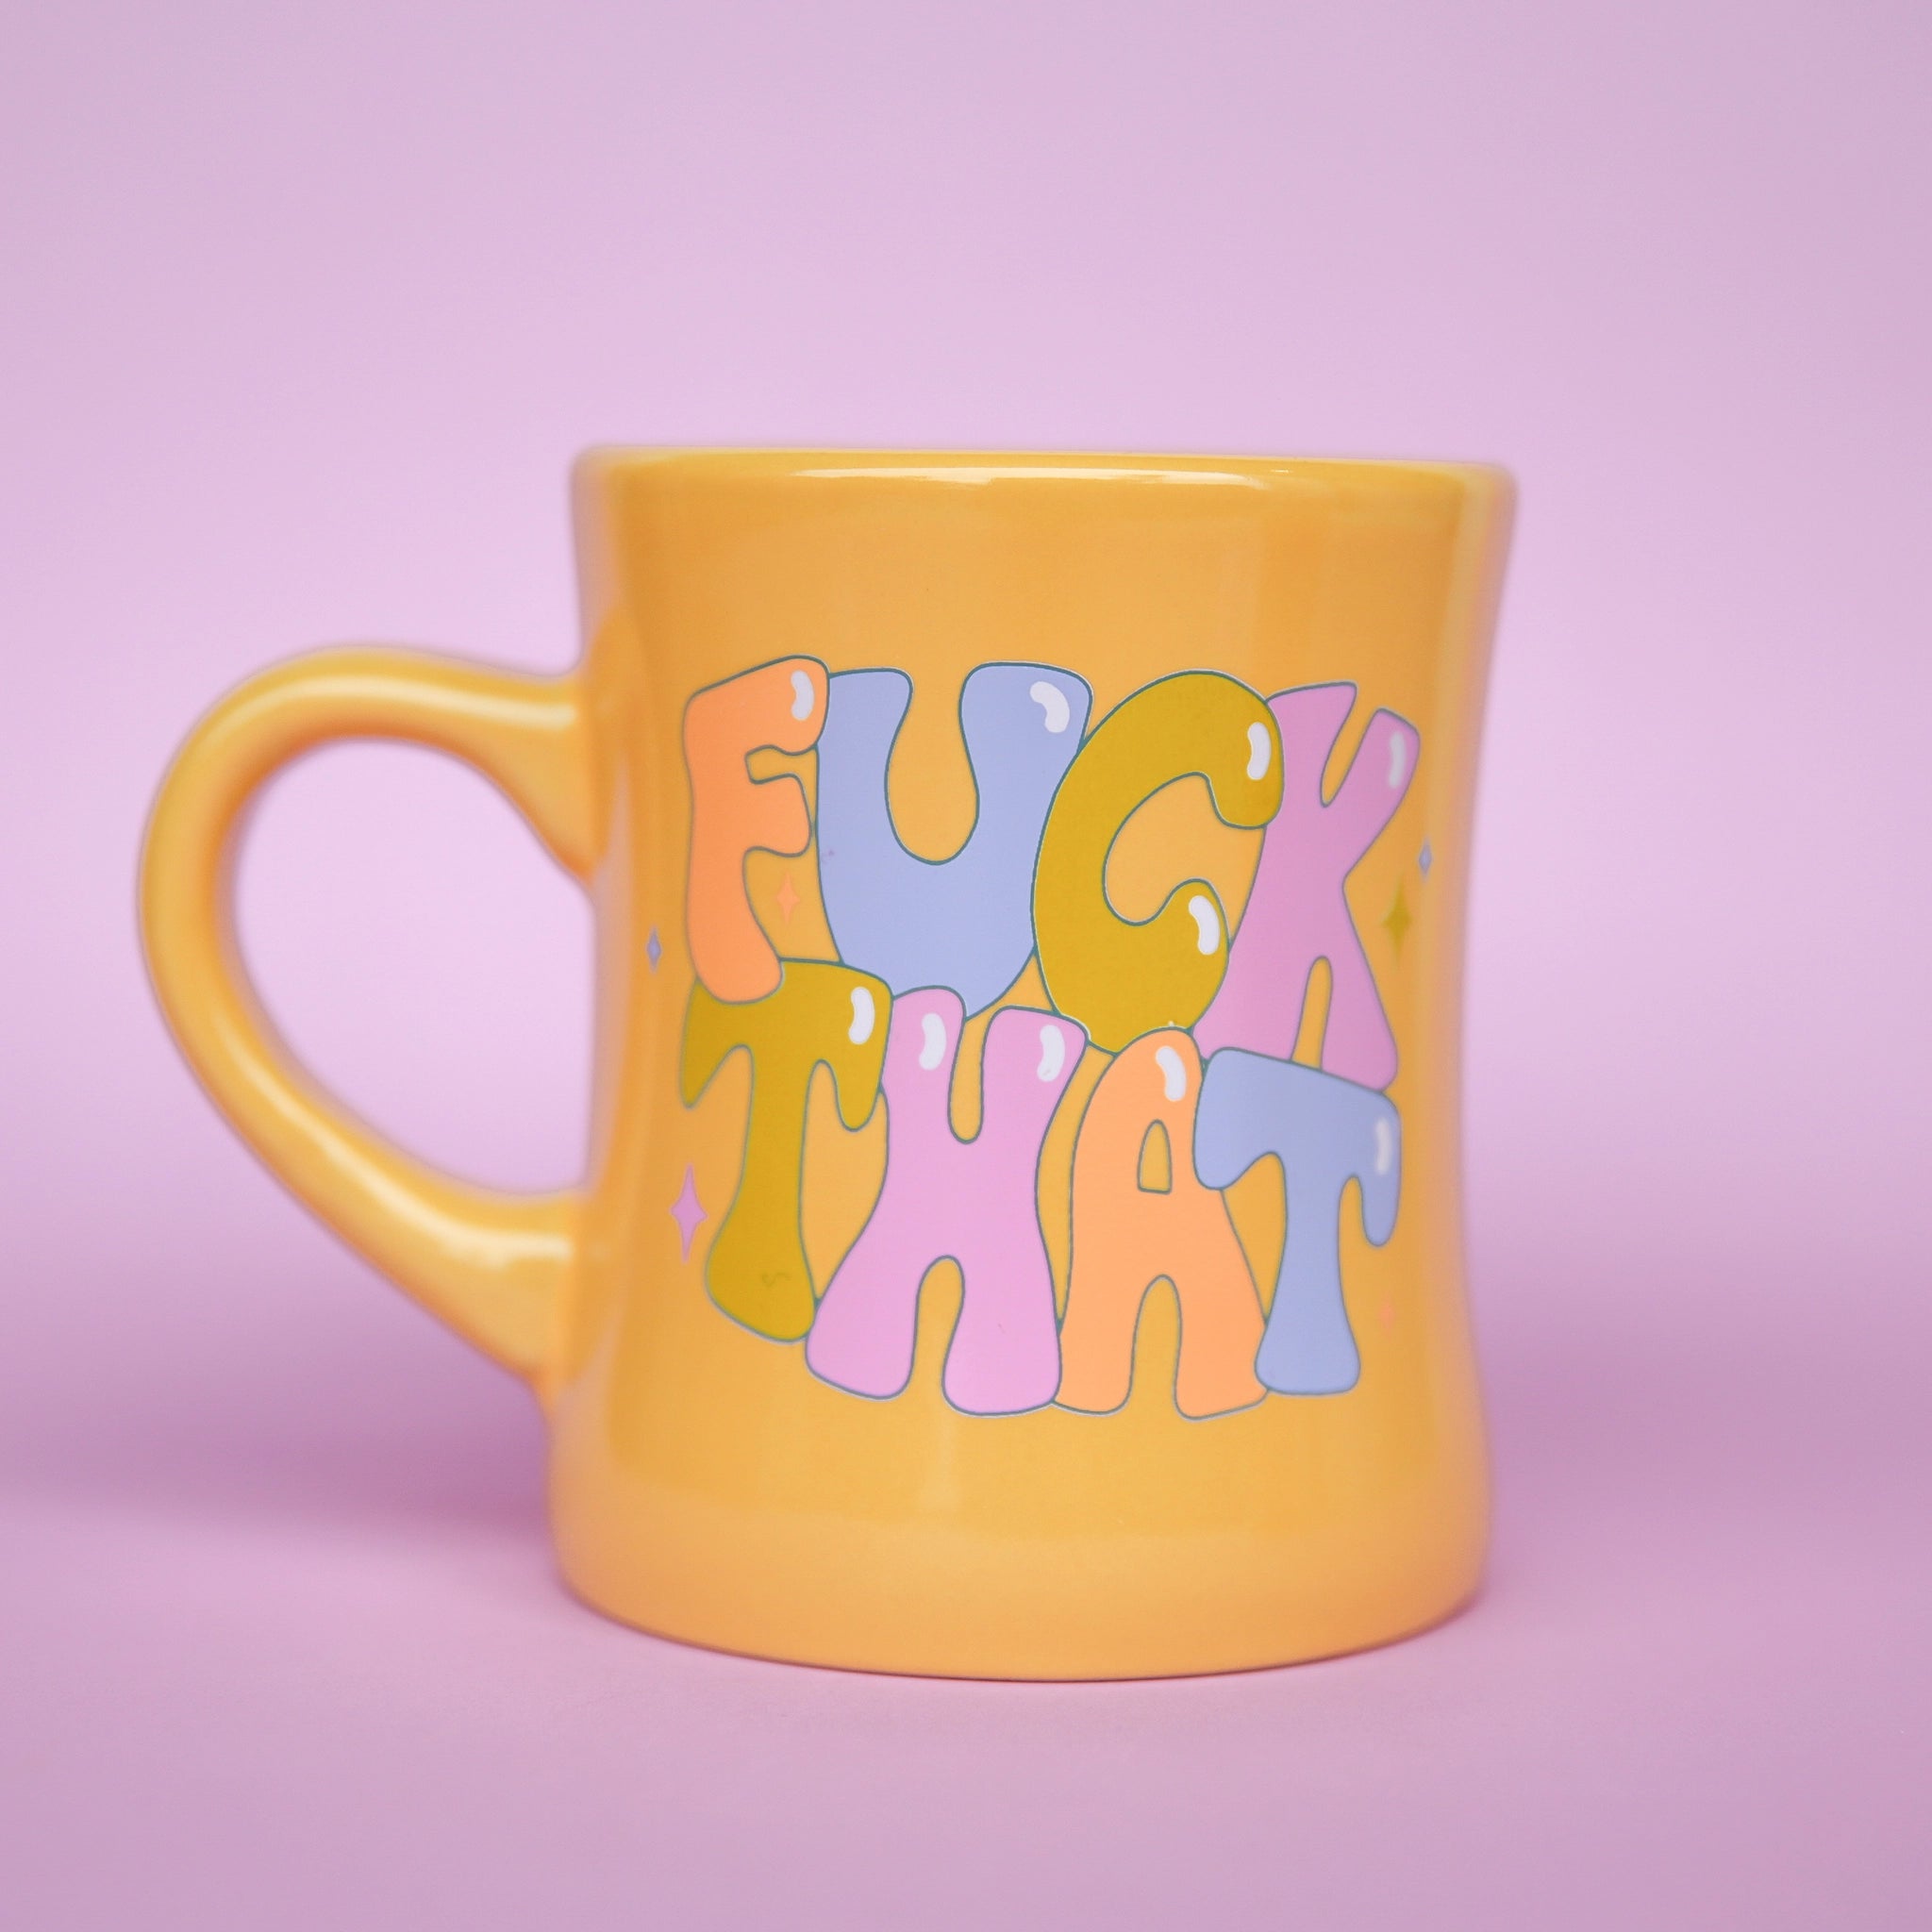 On a purple background is a yellow diner style mug that reads, &quot;Fuck That&quot; in multi colored text.